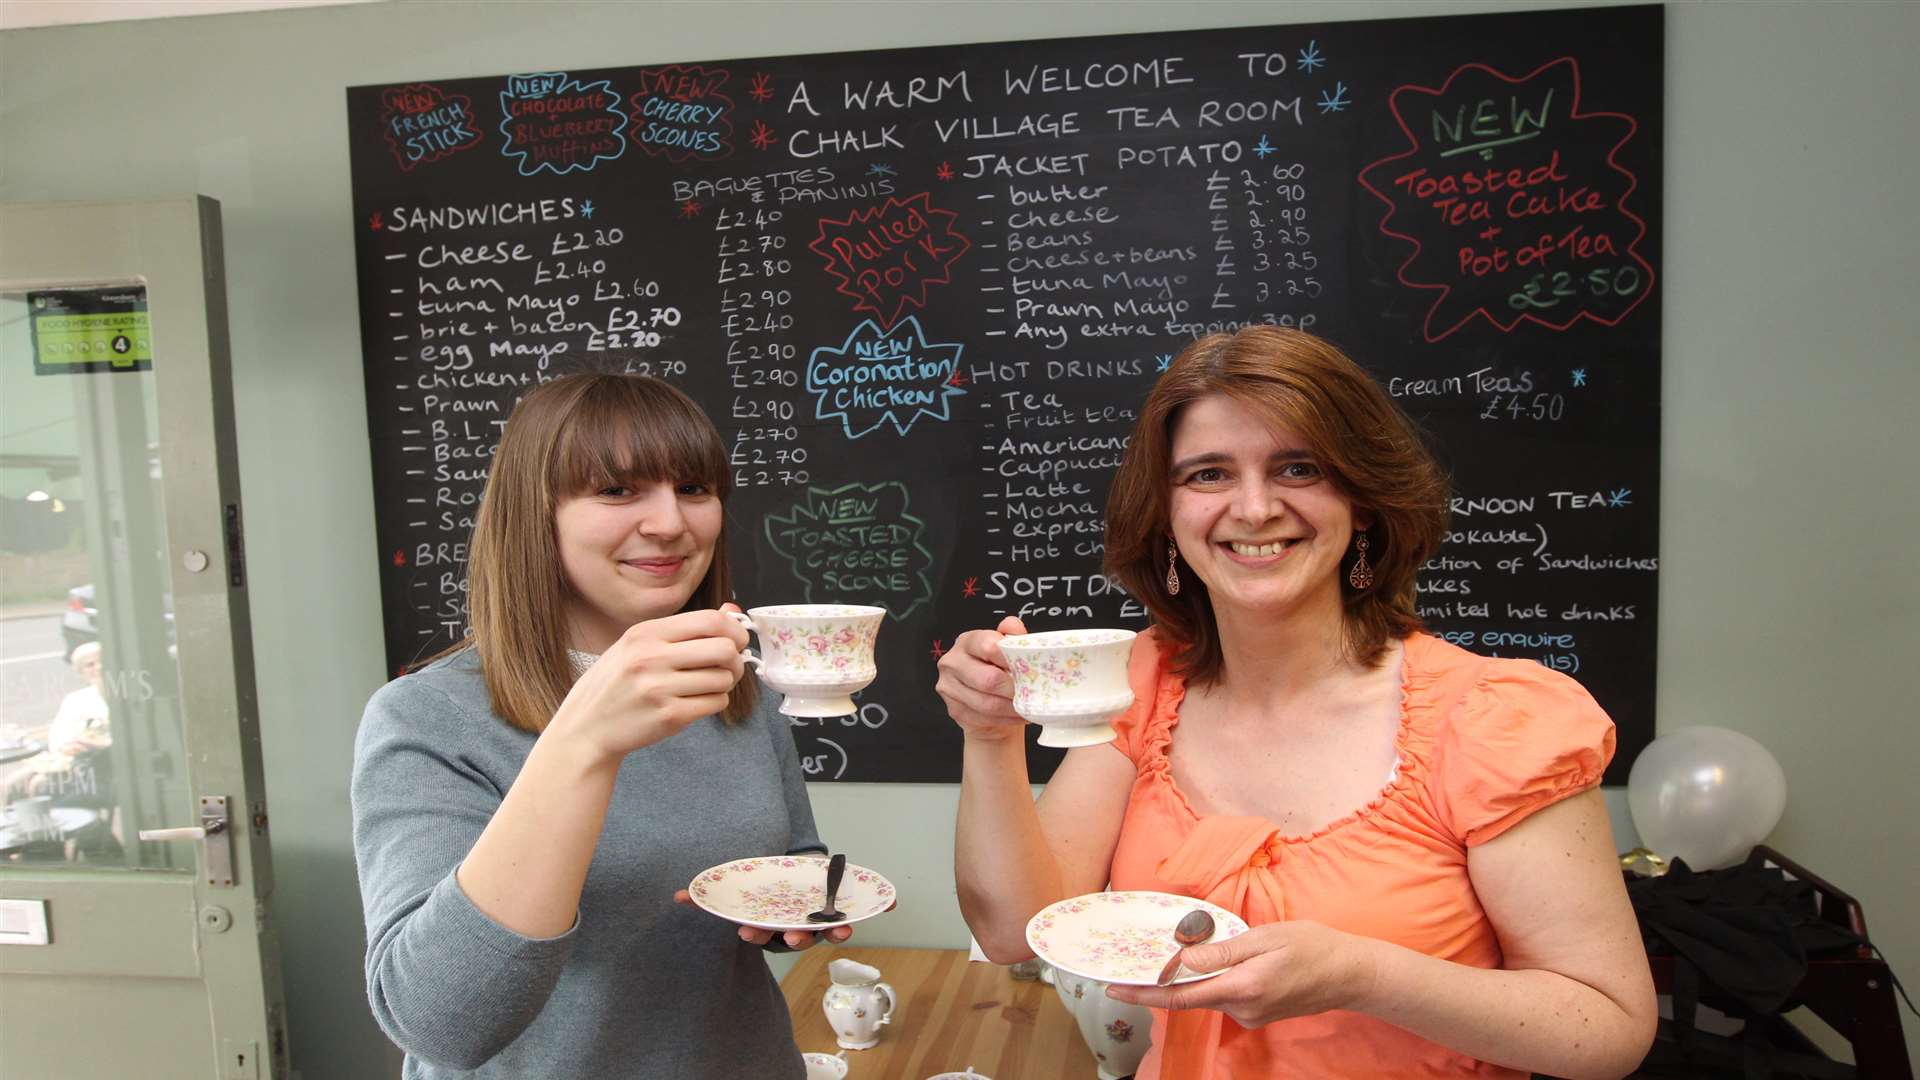 Sarah Bull and Sue Bourne at the official opening of Chalk Village Tea Rooms